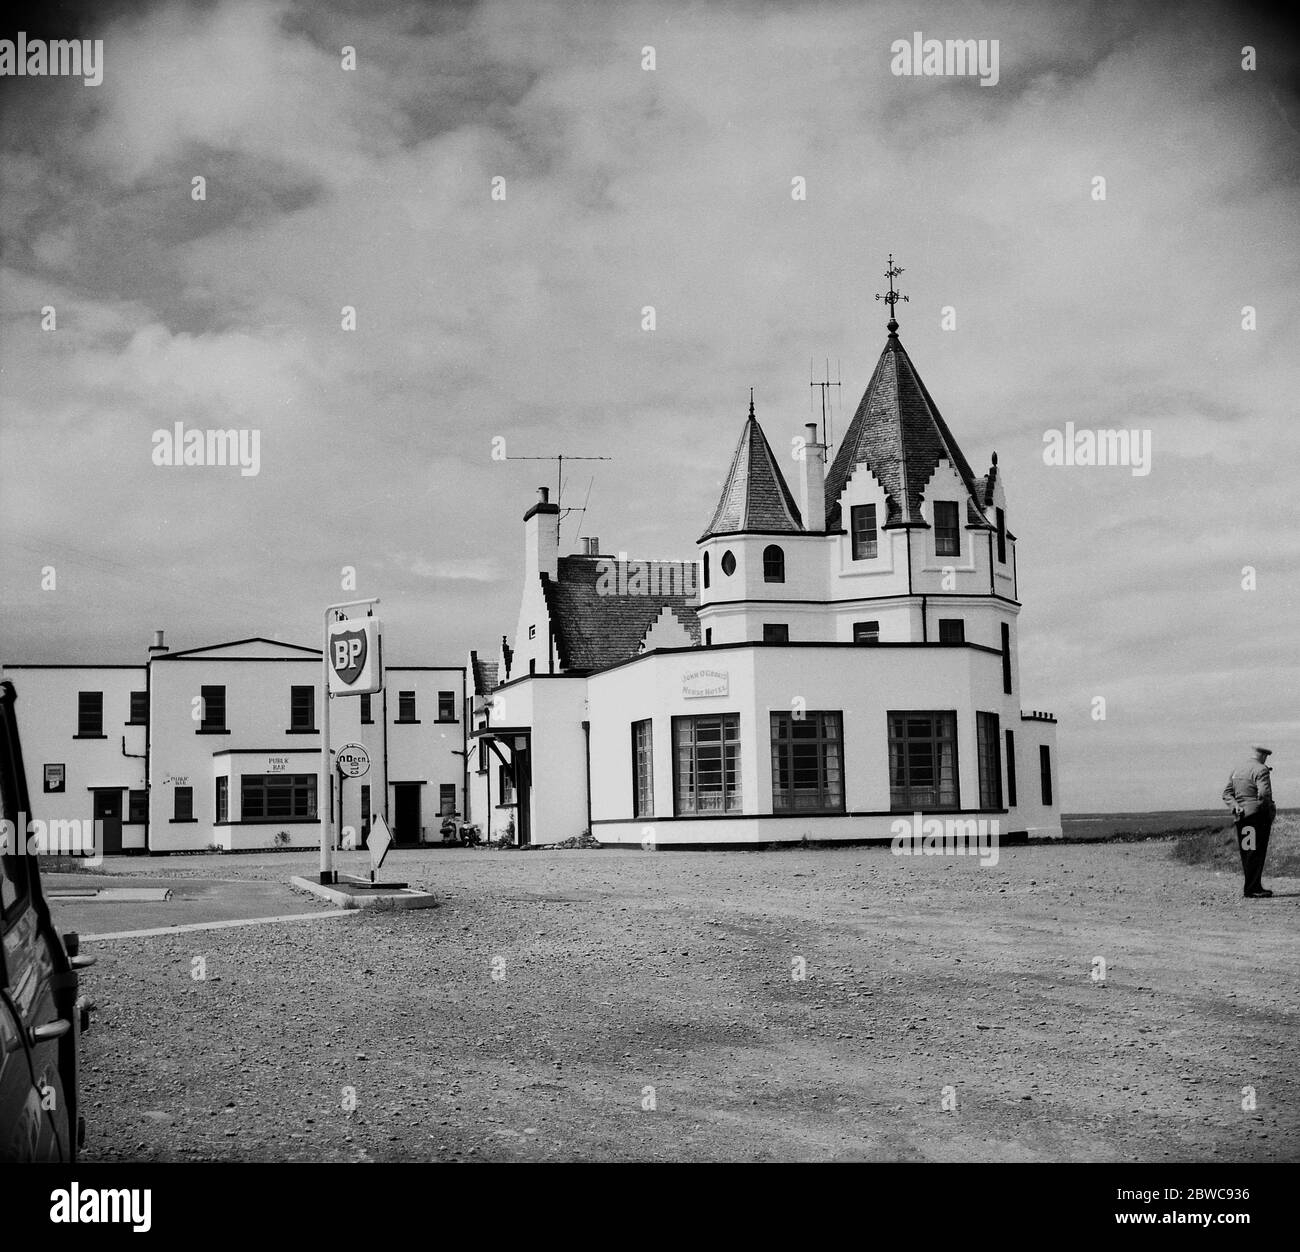 1950s, historical, Exterior view of the John o'Groats House hotel, Canisbay, Caithness, Scotland, UK,  showing the building's distinctive shape, turrets and gravel surfaced car park with its own fuel refilling station.The iconic looking house of an octagon shape was built in 1875 near or on the site of the house of Dutchman Jan de Groot from whom the site takes its name, who in past times ran a ferry to the Island of Orkney charging a coin which became known as 'the groat'. Stock Photo